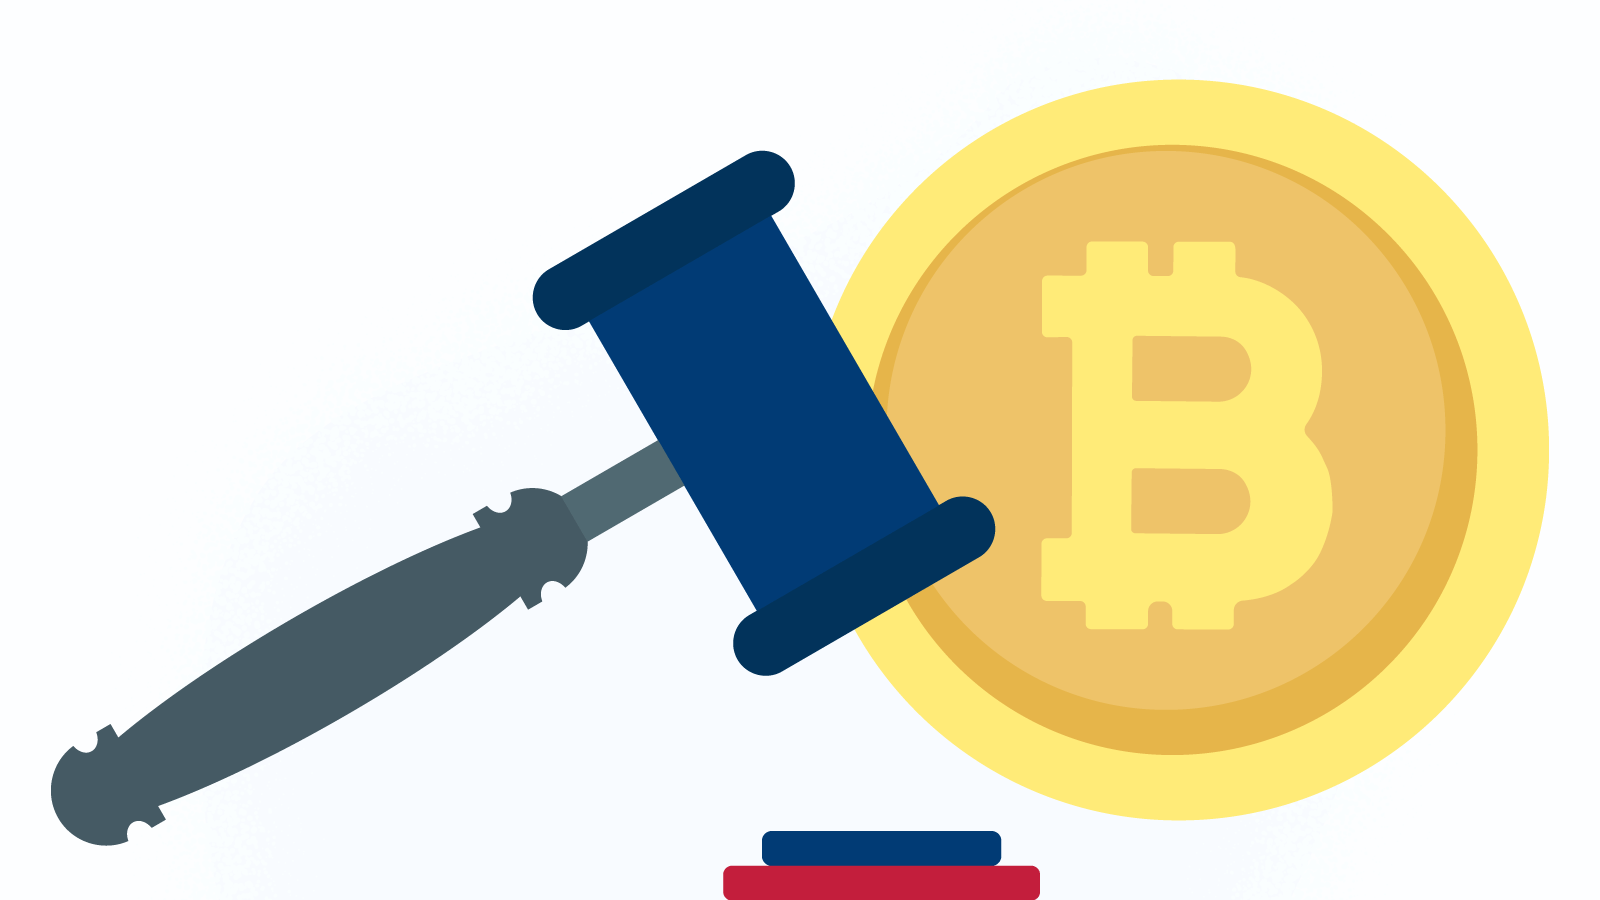 Is Crypto Gambling Legal